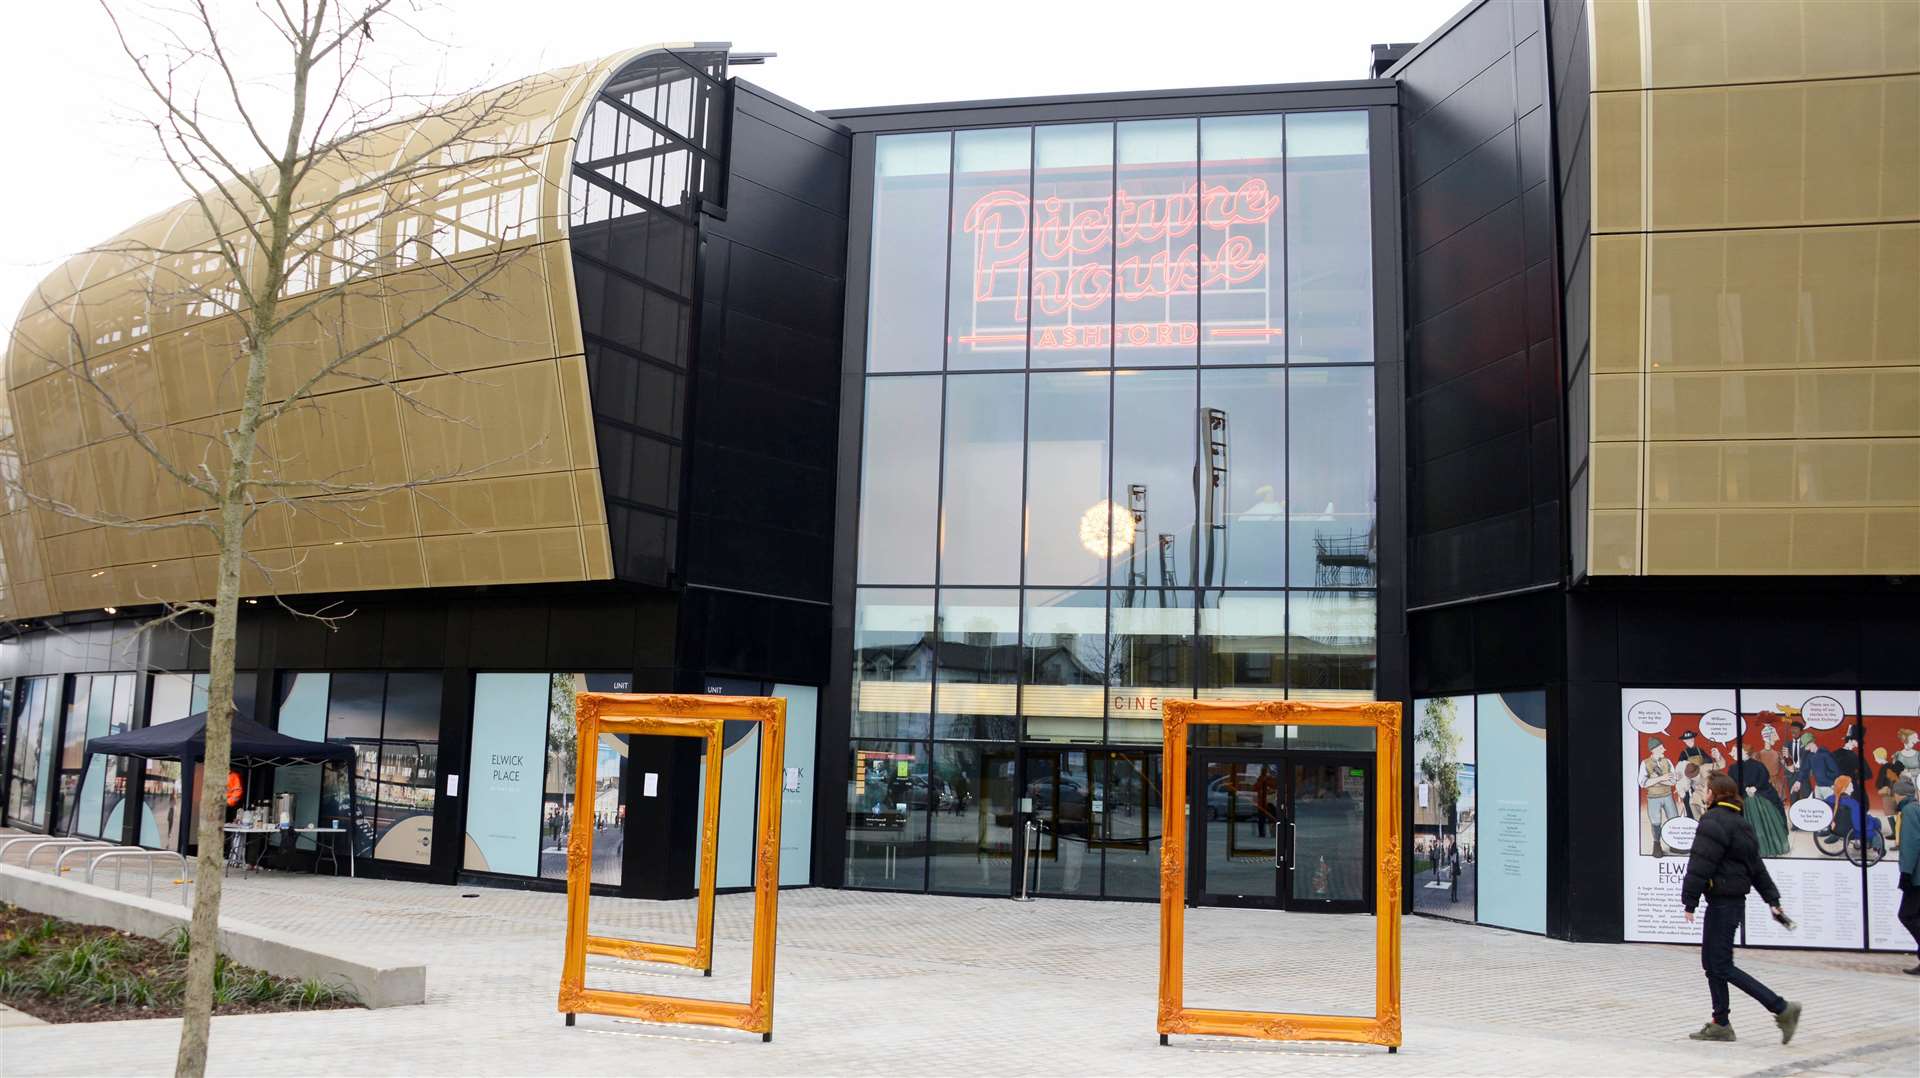 Elwick Place is also home to Ashford Picturehouse. Picture: Paul Amos.